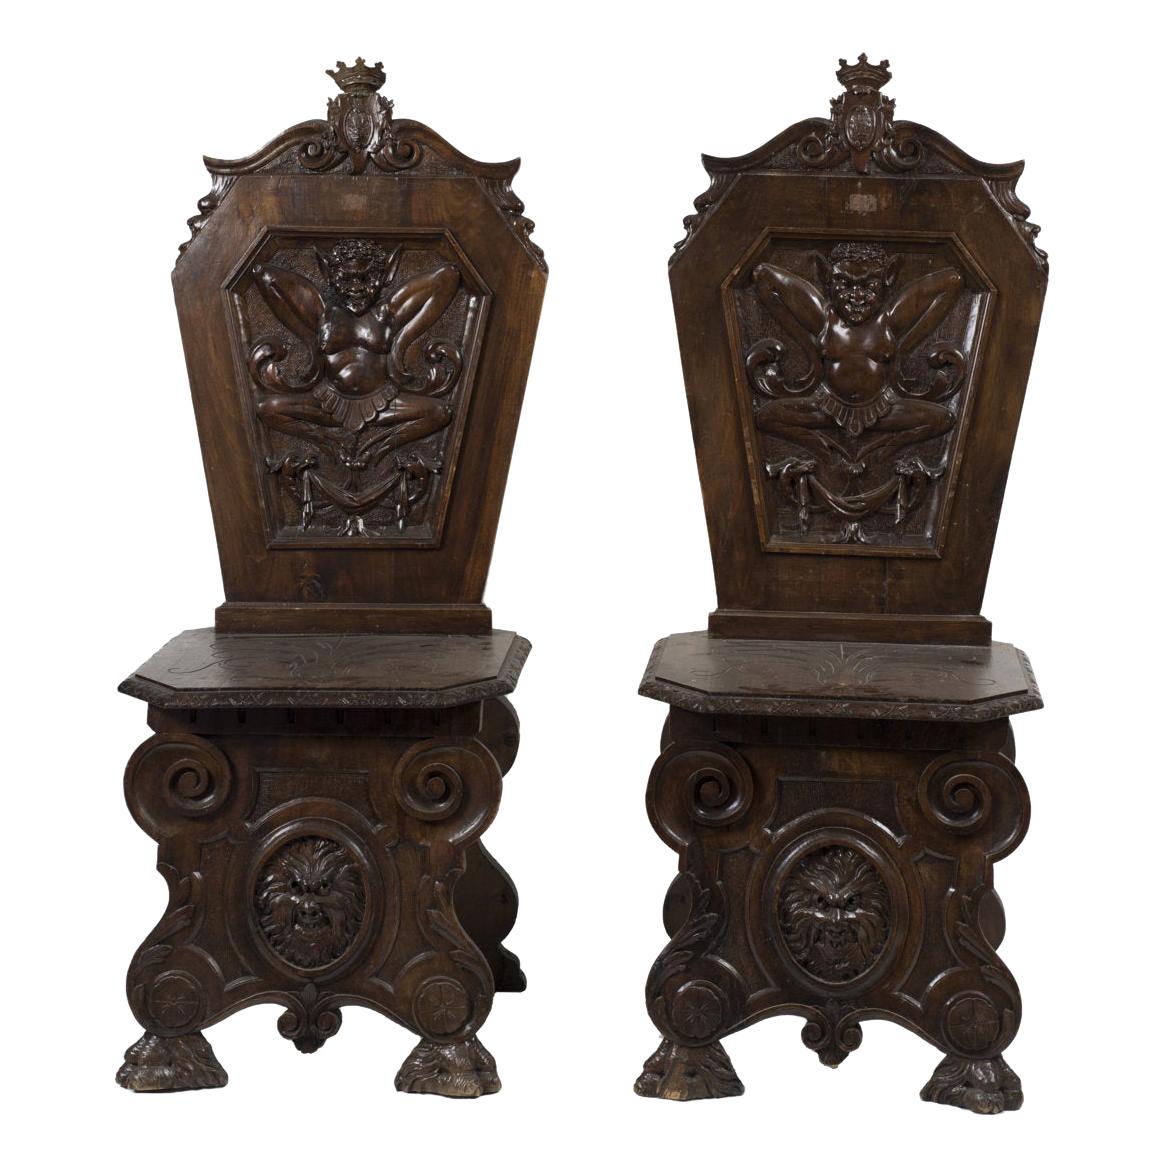 Pair of Antique Seats, Early 20th Century